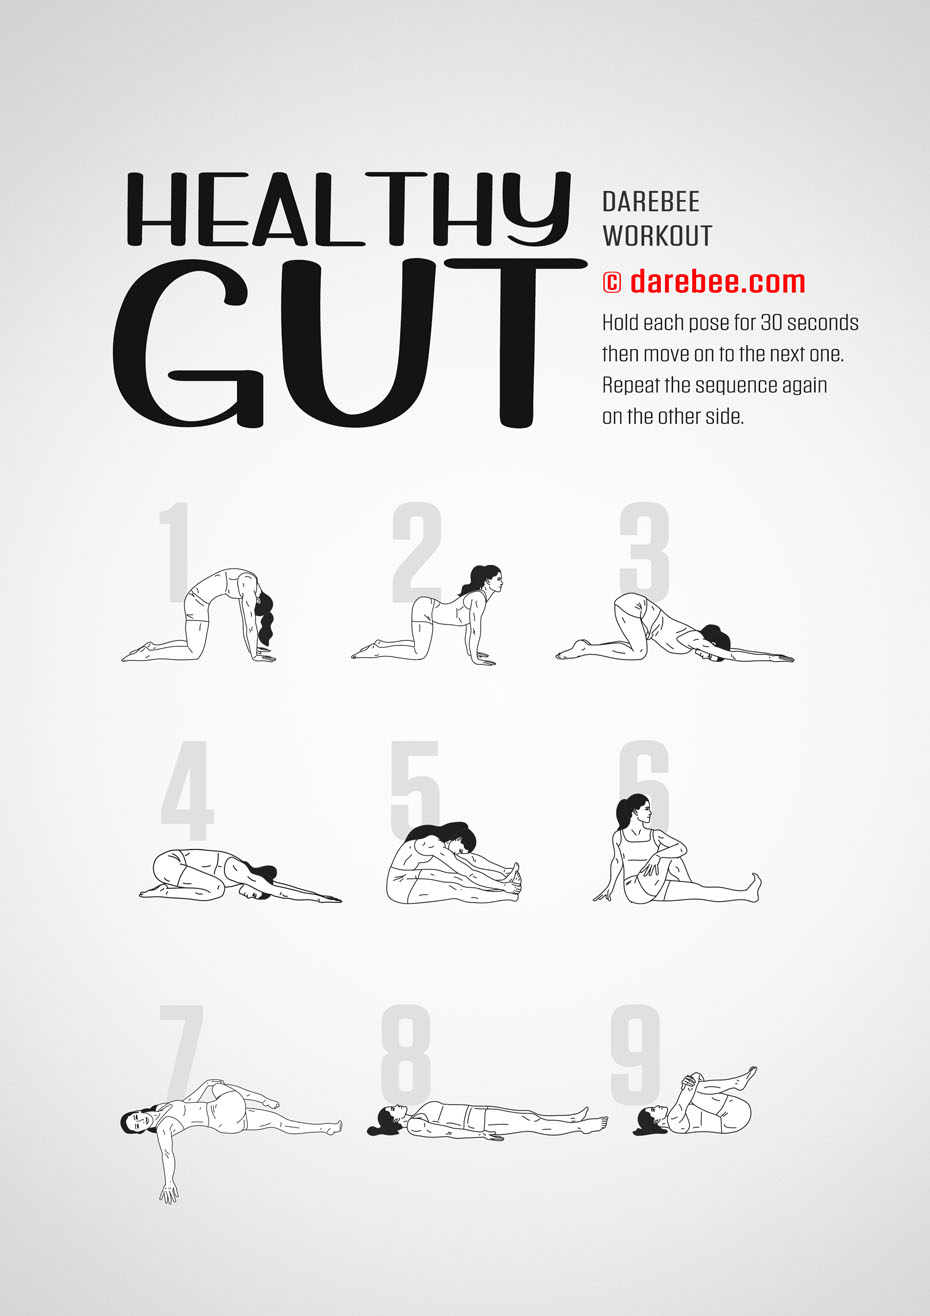 Healthy Gut is a yoga-based Darebee home-fitness workout that helps you feel re-energized.